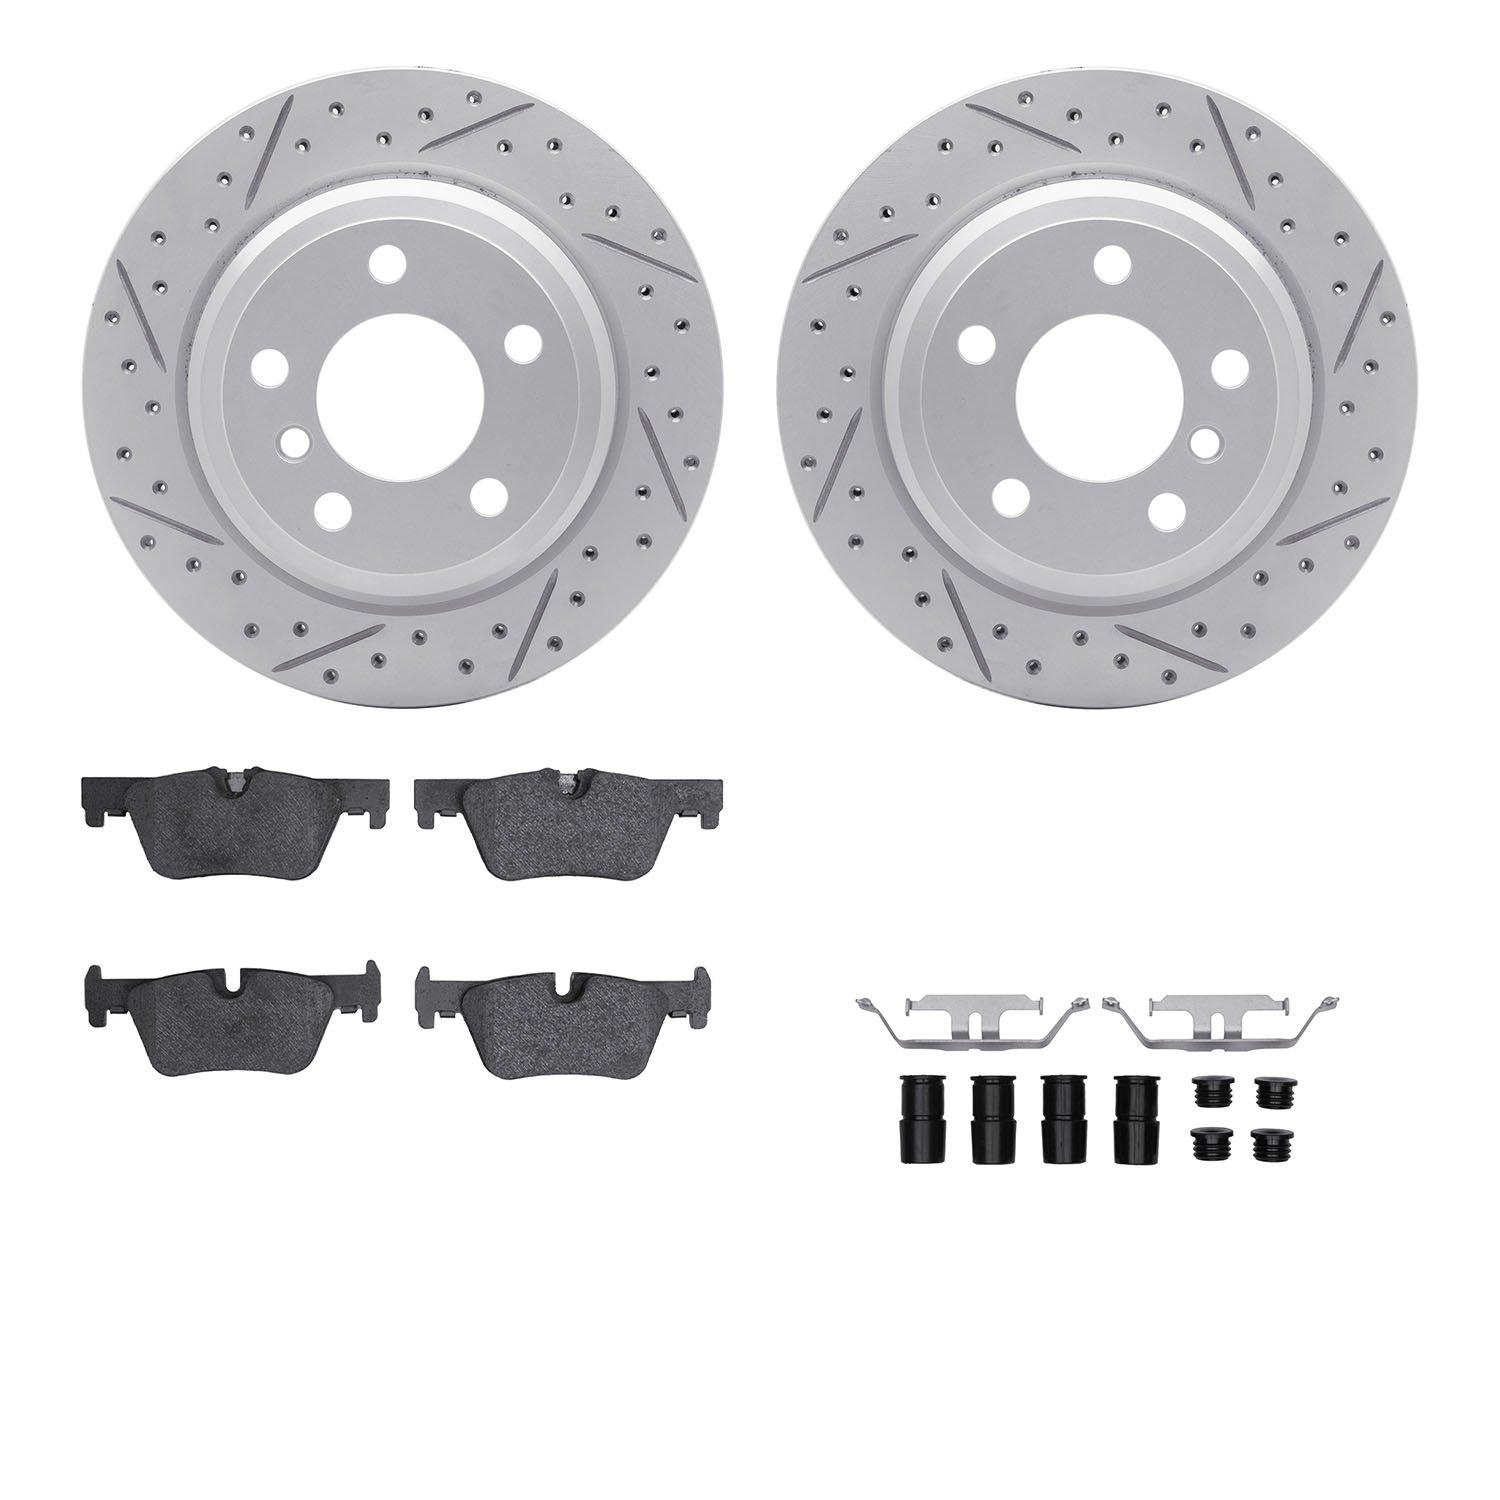 2512-31088 Geoperformance Drilled/Slotted Rotors w/5000 Advanced Brake Pads Kit & Hardware, 2013-2020 BMW, Position: Rear